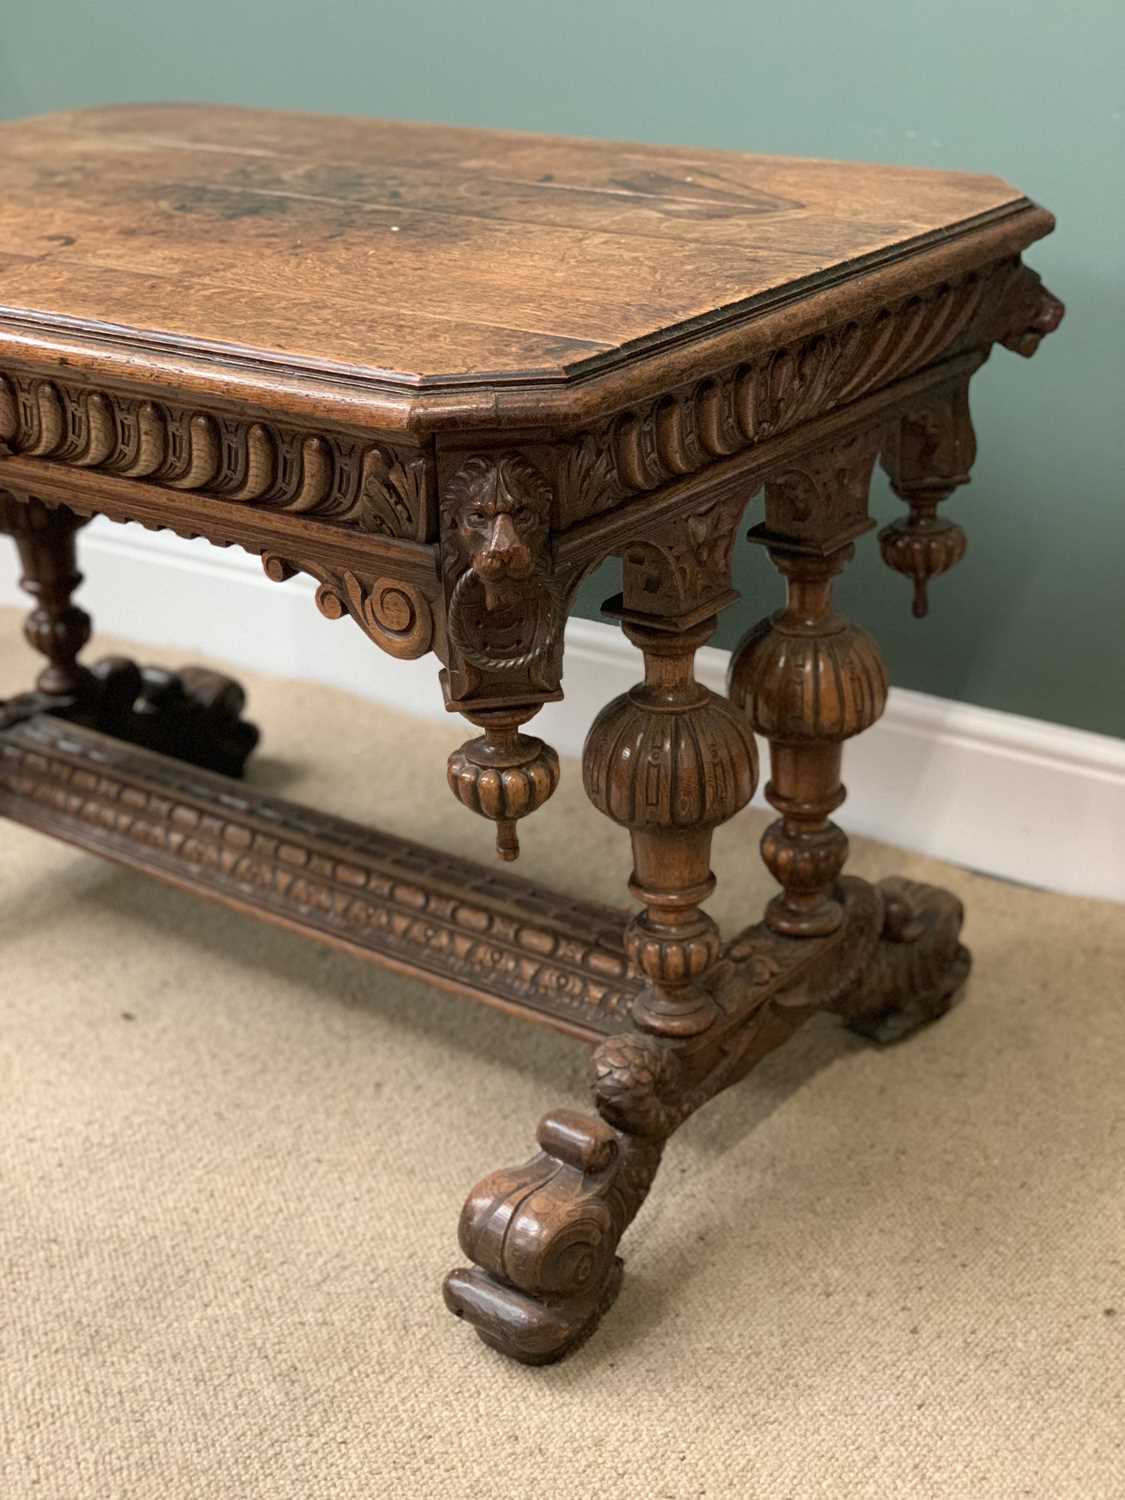 RENAISSANCE REVIVAL STYLE ANTIQUE CARVED OAK LIBRARY TABLE with lion mask detail and single drawer - Image 5 of 5